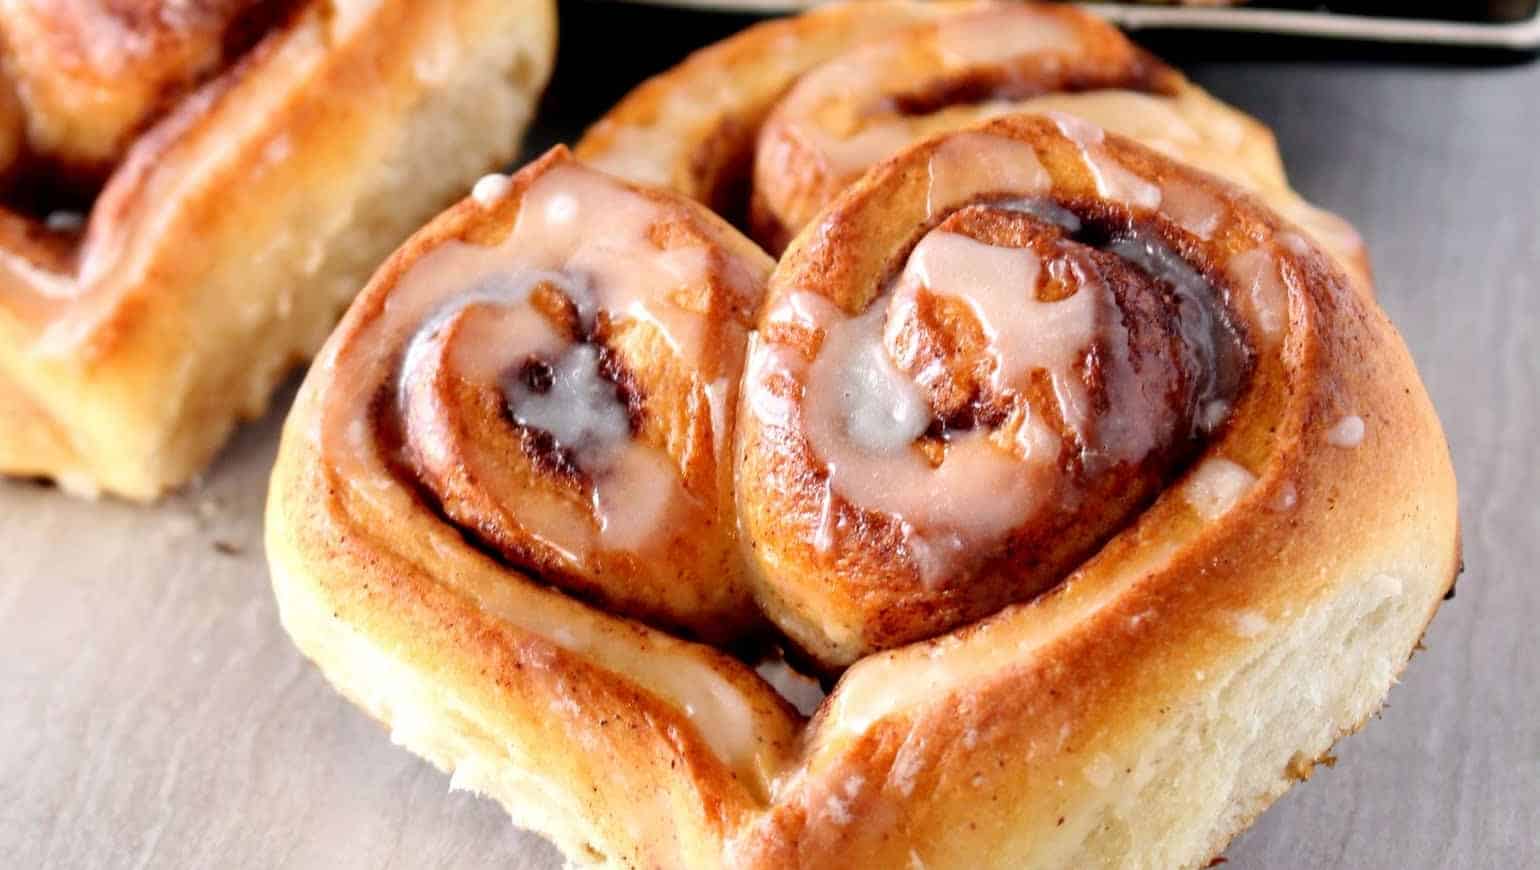 Cinnamon rolls on a plate with icing.